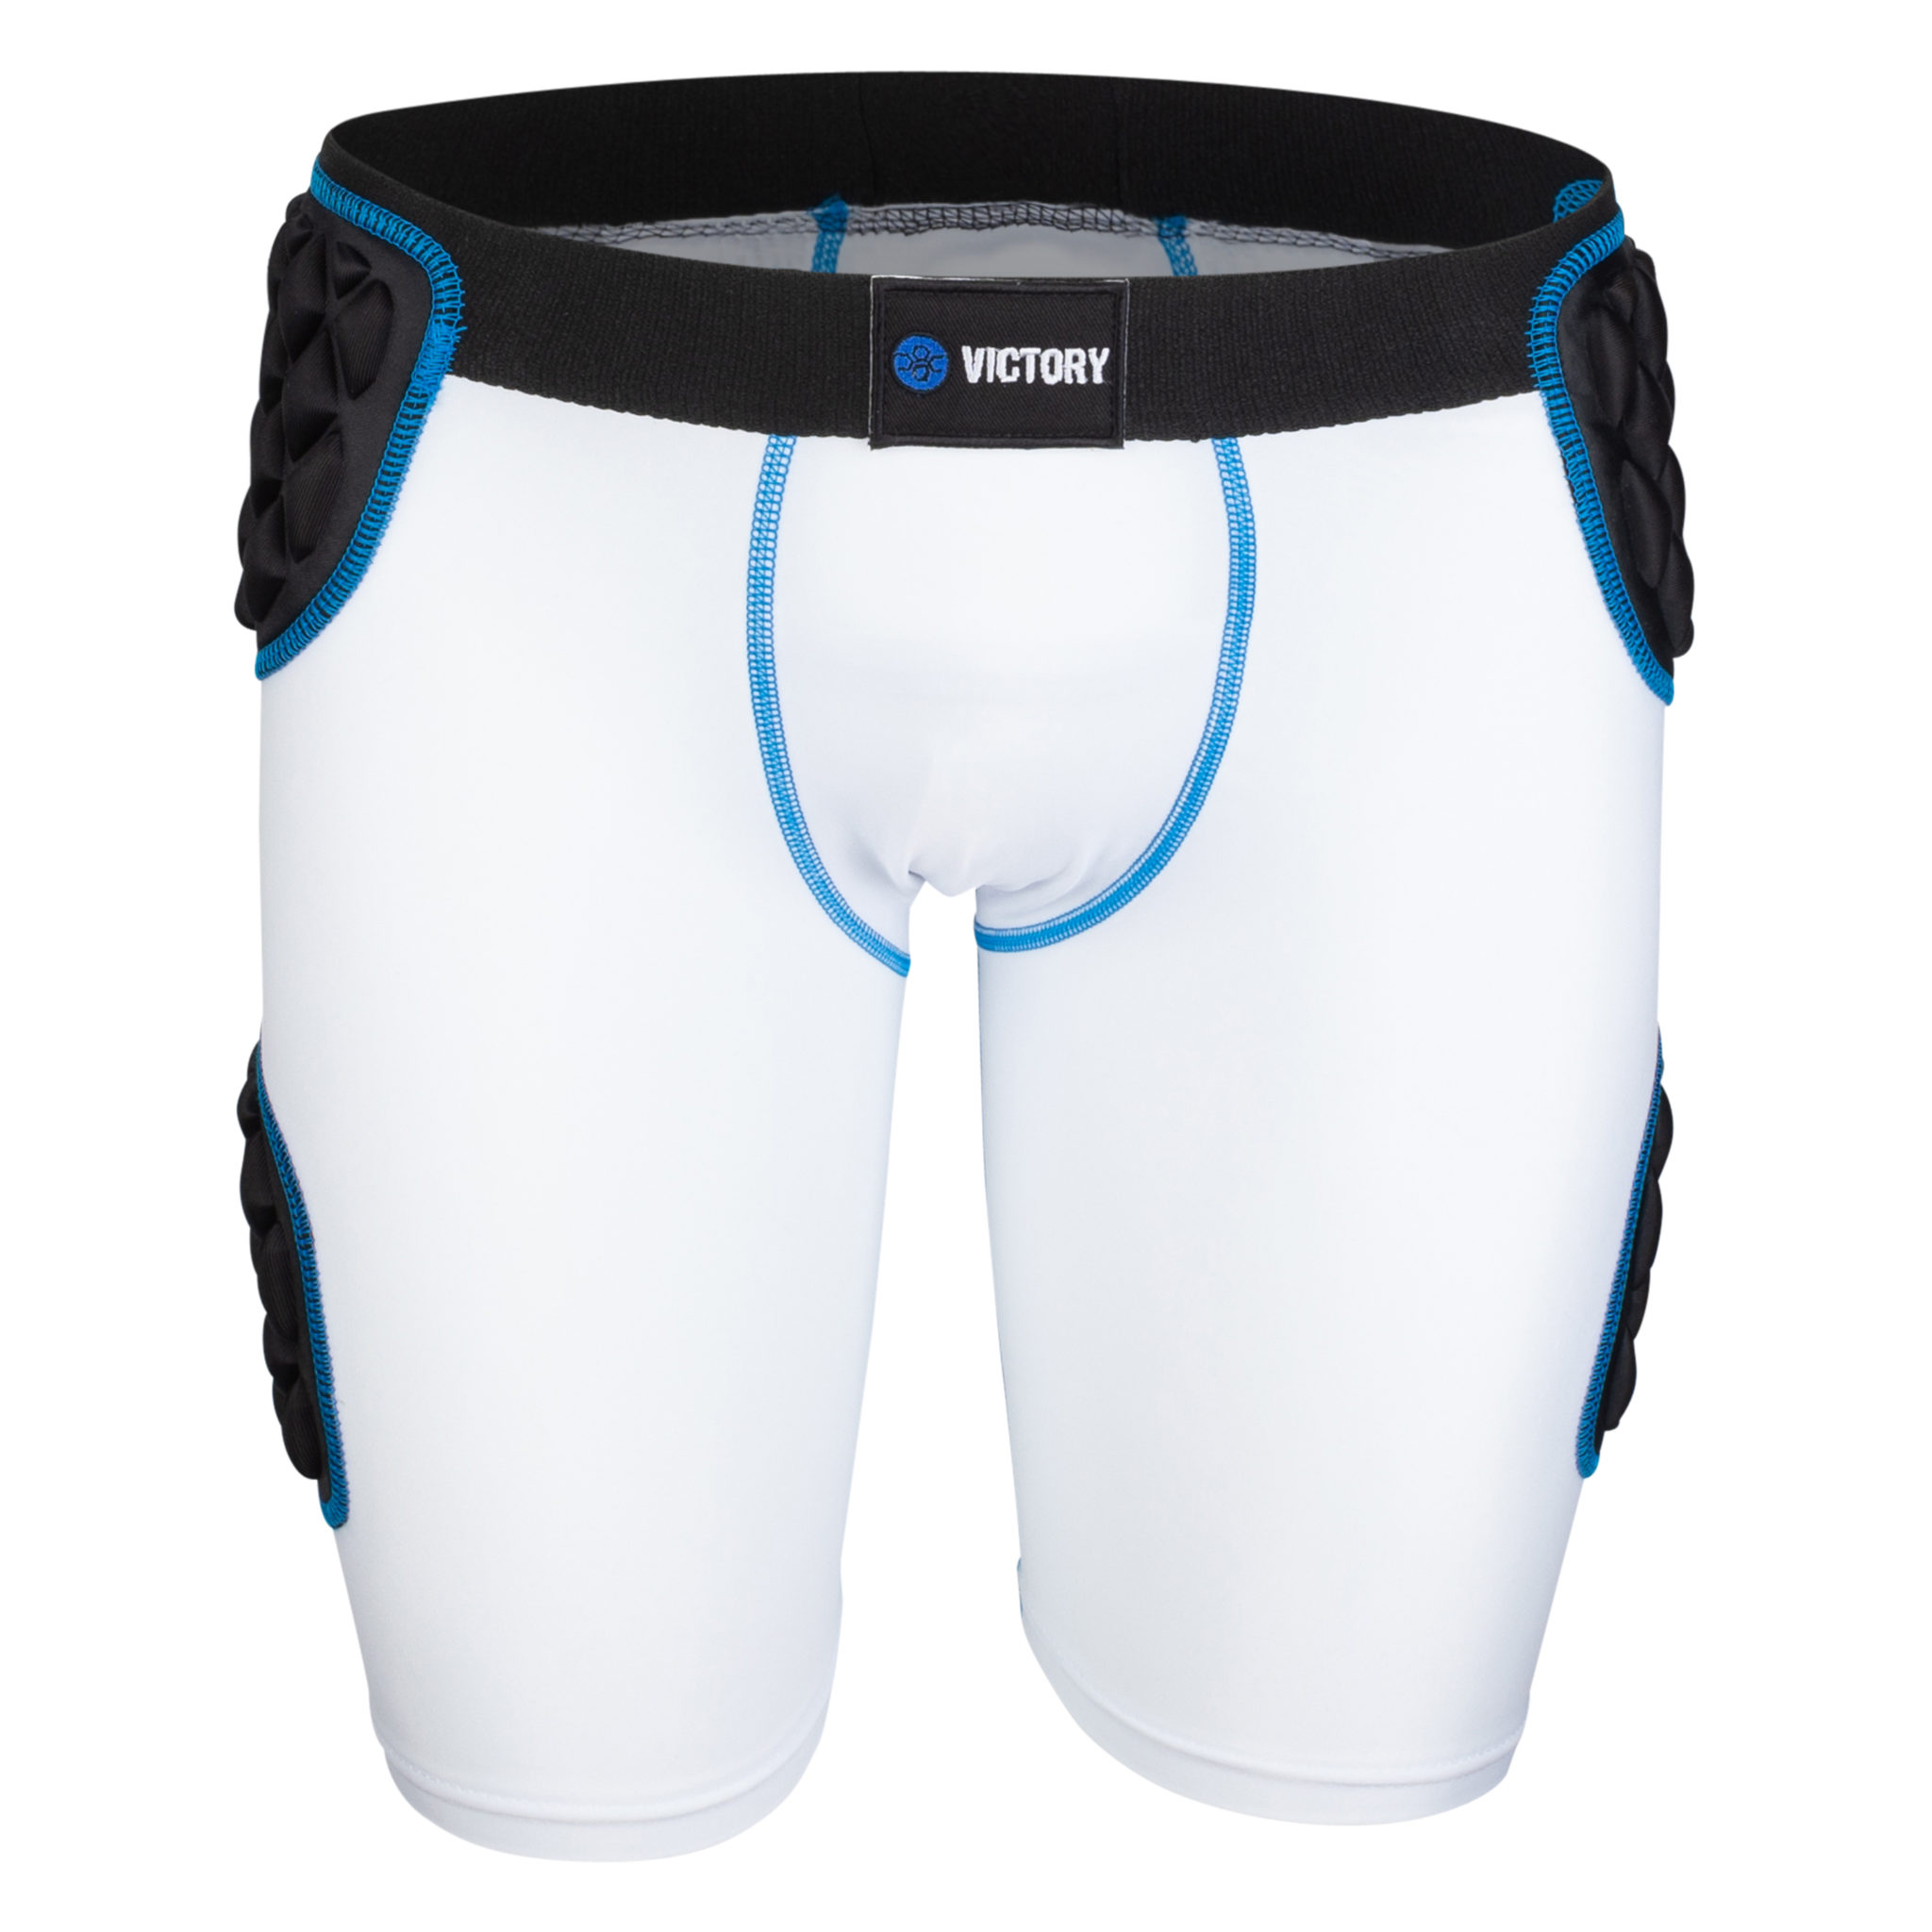 Shorts black pads front